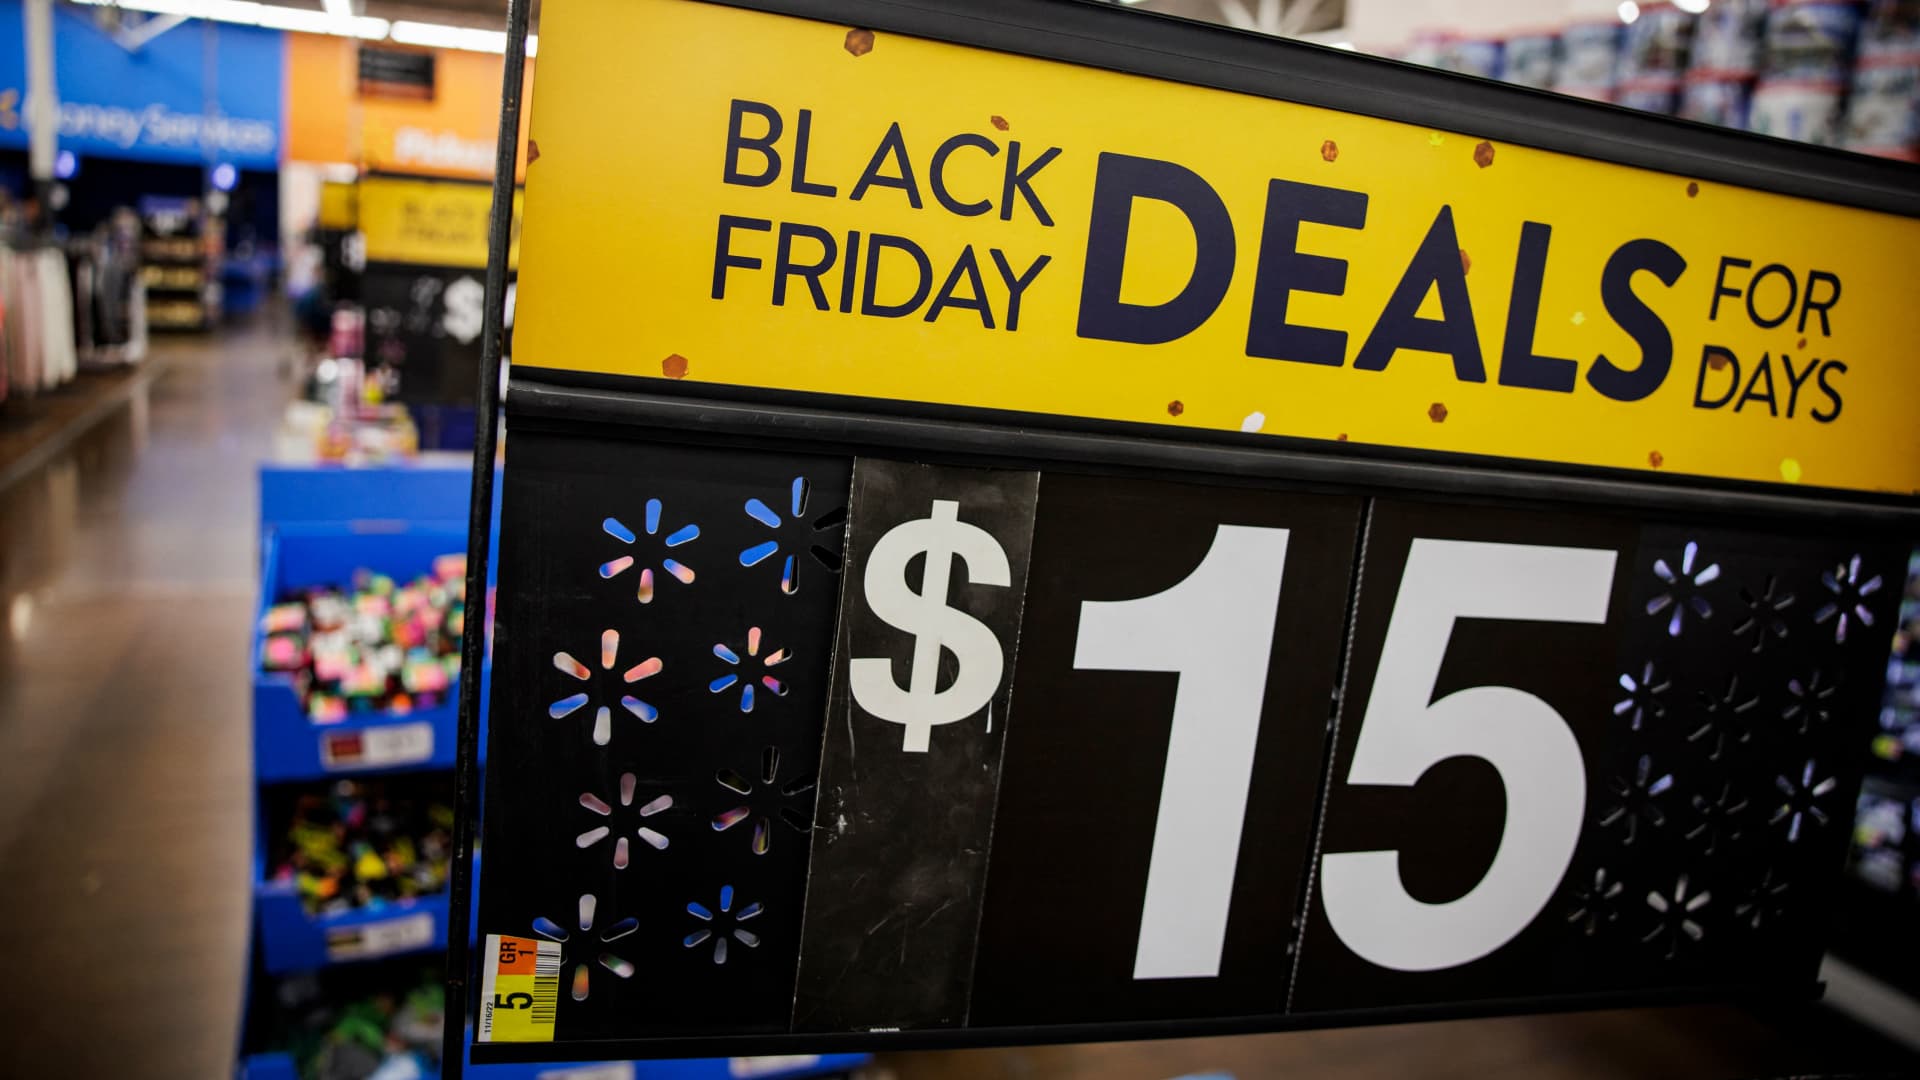 Walmart overtakes Amazon in shoppers’ search for Black Friday bargains
– News X